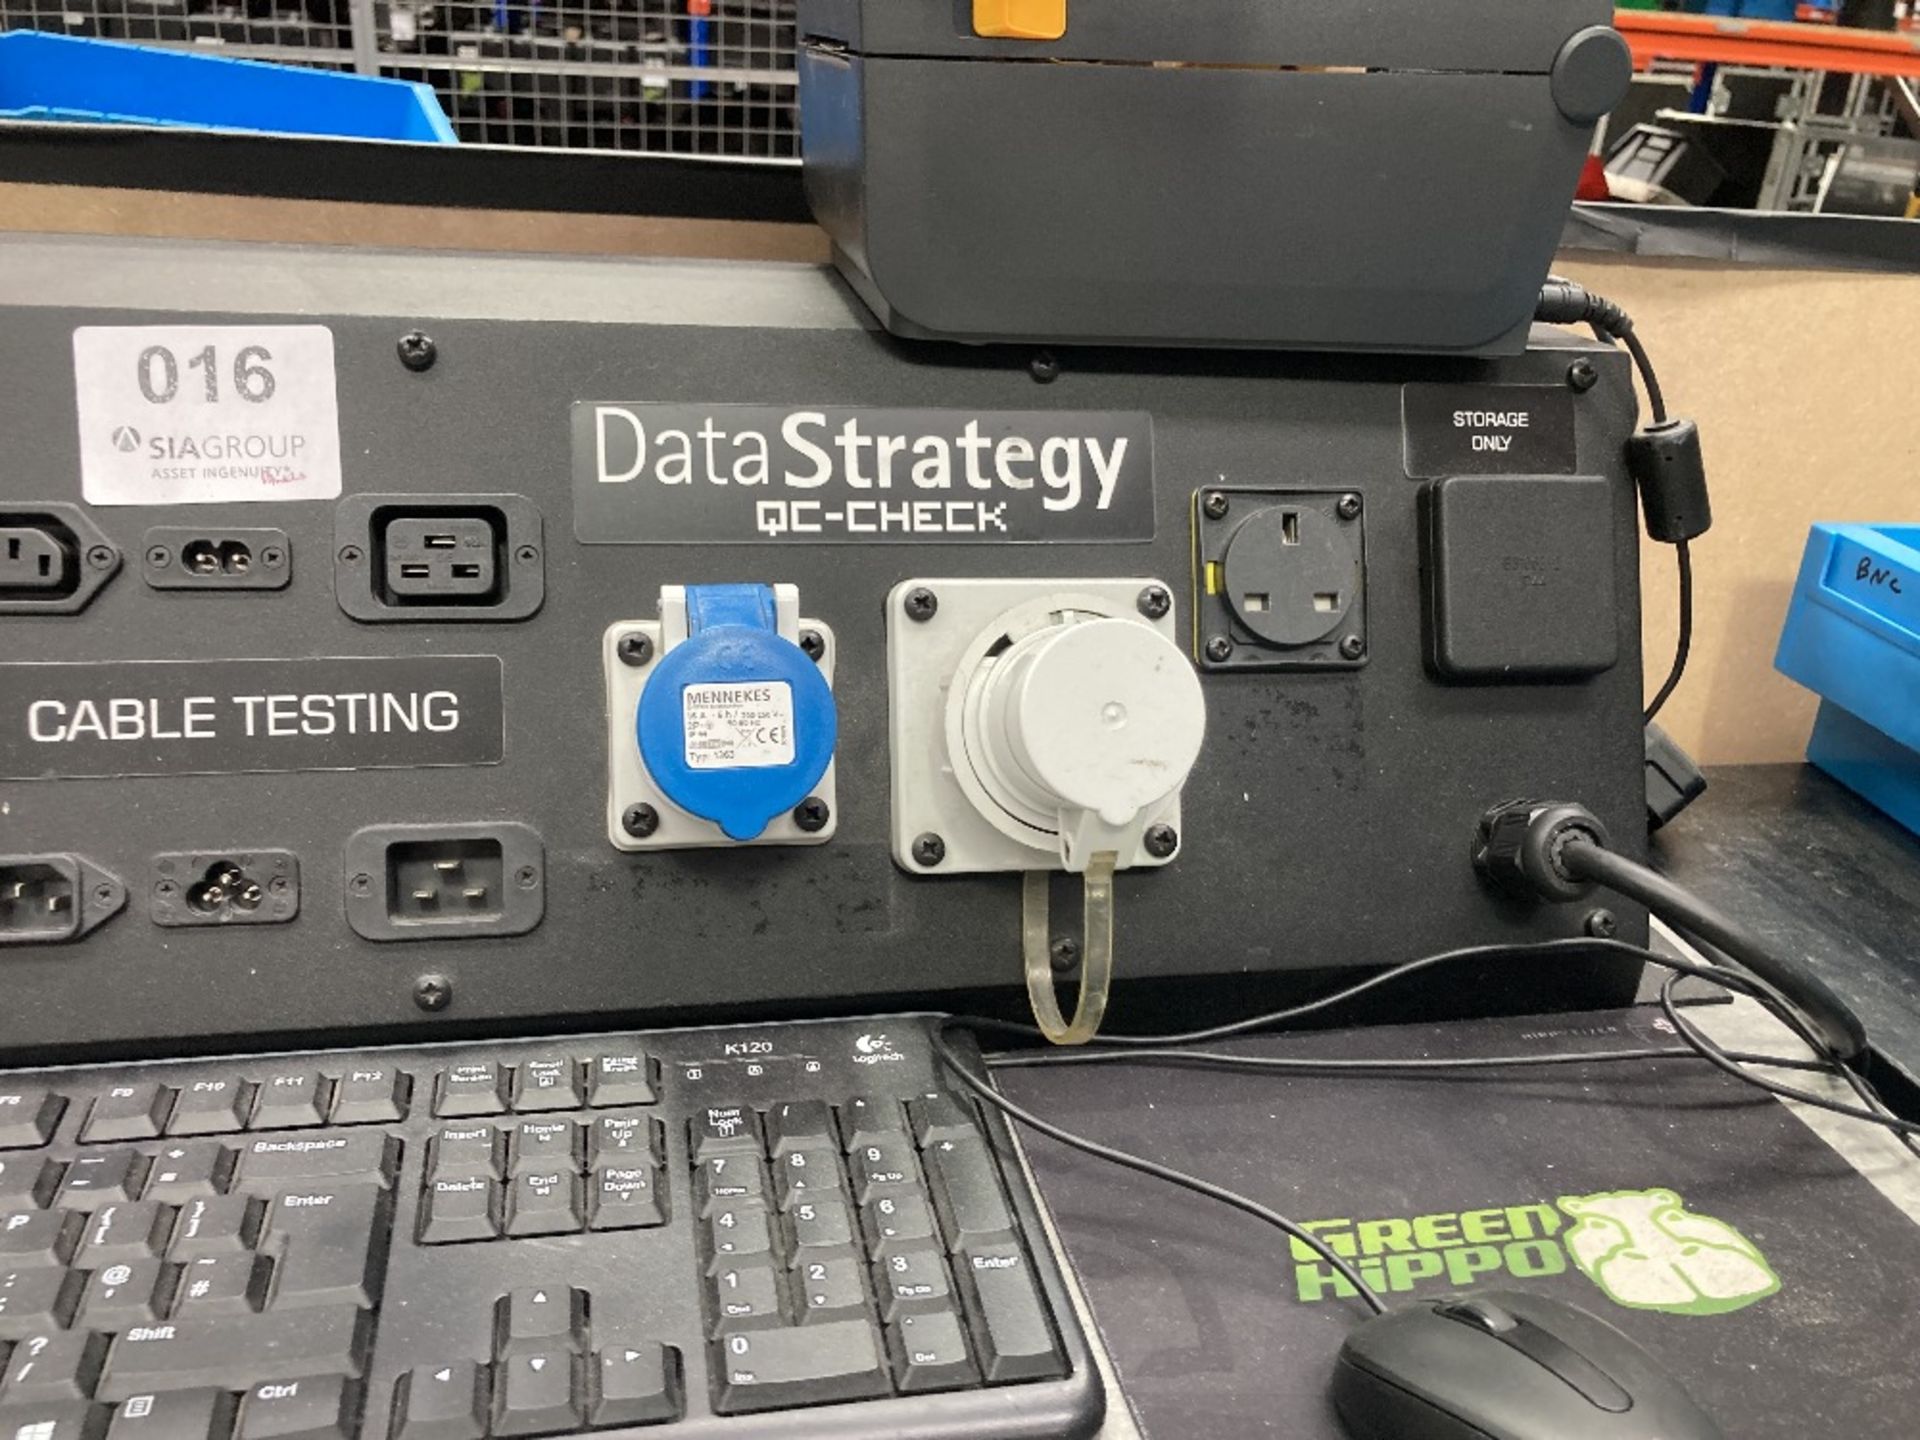 Data Strategy QC-Check Desk Mount Portable Appliance Test Processor PAT-4 - Image 6 of 8